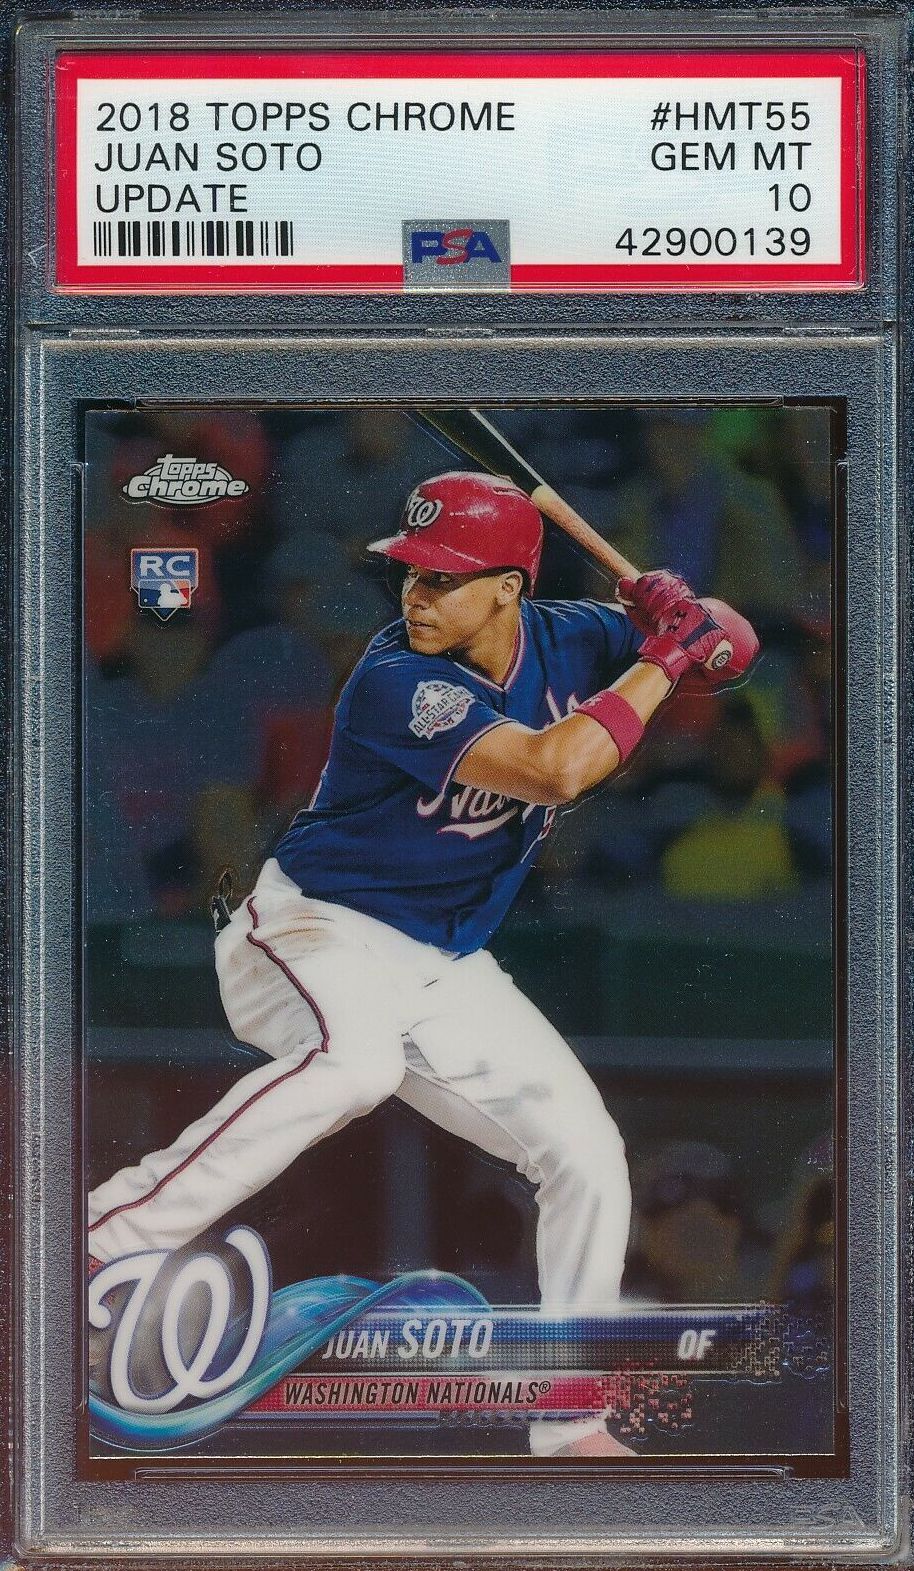 Image of 2018 Topps Chrome Update Juan Soto RC PSA 10 sports trading card